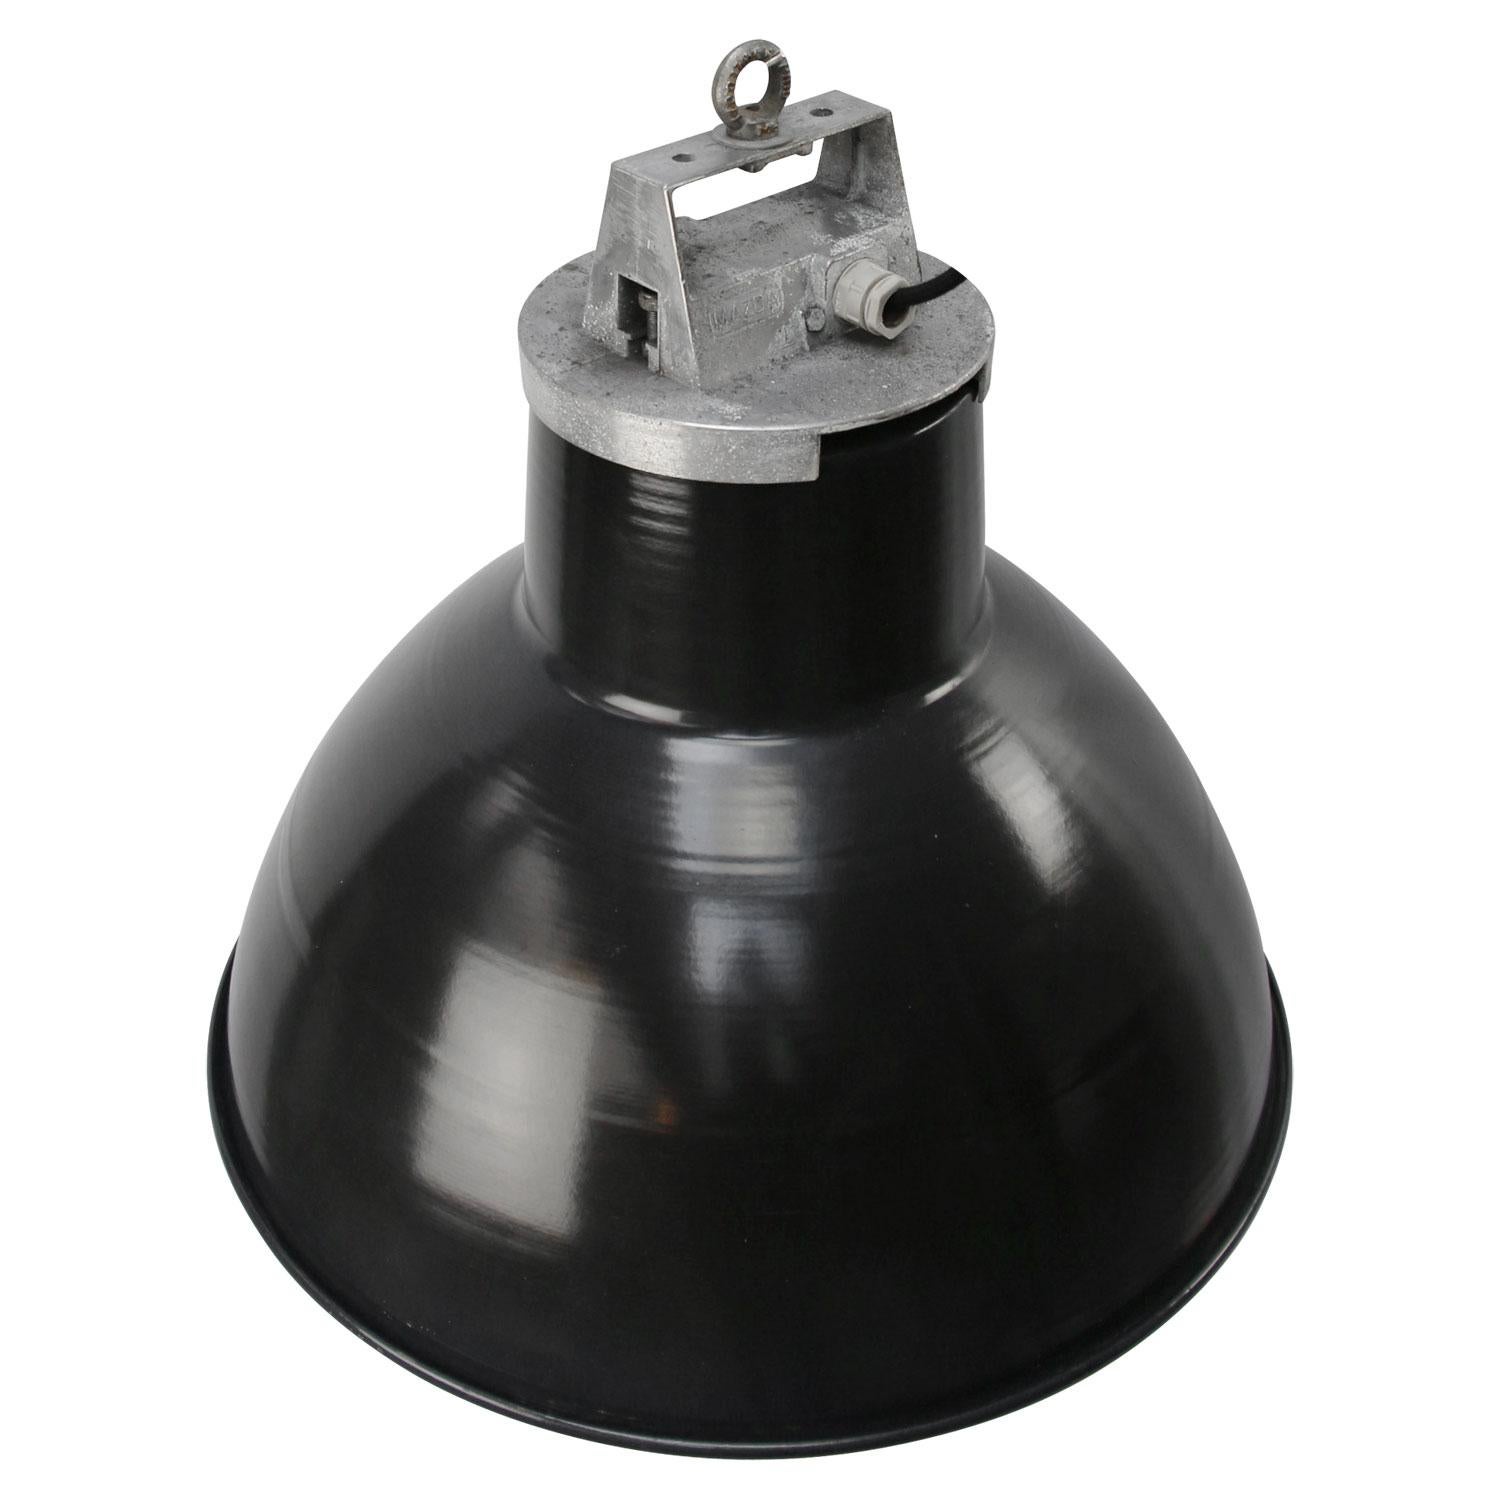 French Factory light by Mazda
Thick quality Enamel.
Used in warehouses and factories. 

Weight: 4.20 kg / 9.3 lb

Priced per individual item. All lamps have been made suitable by international standards for incandescent light bulbs,